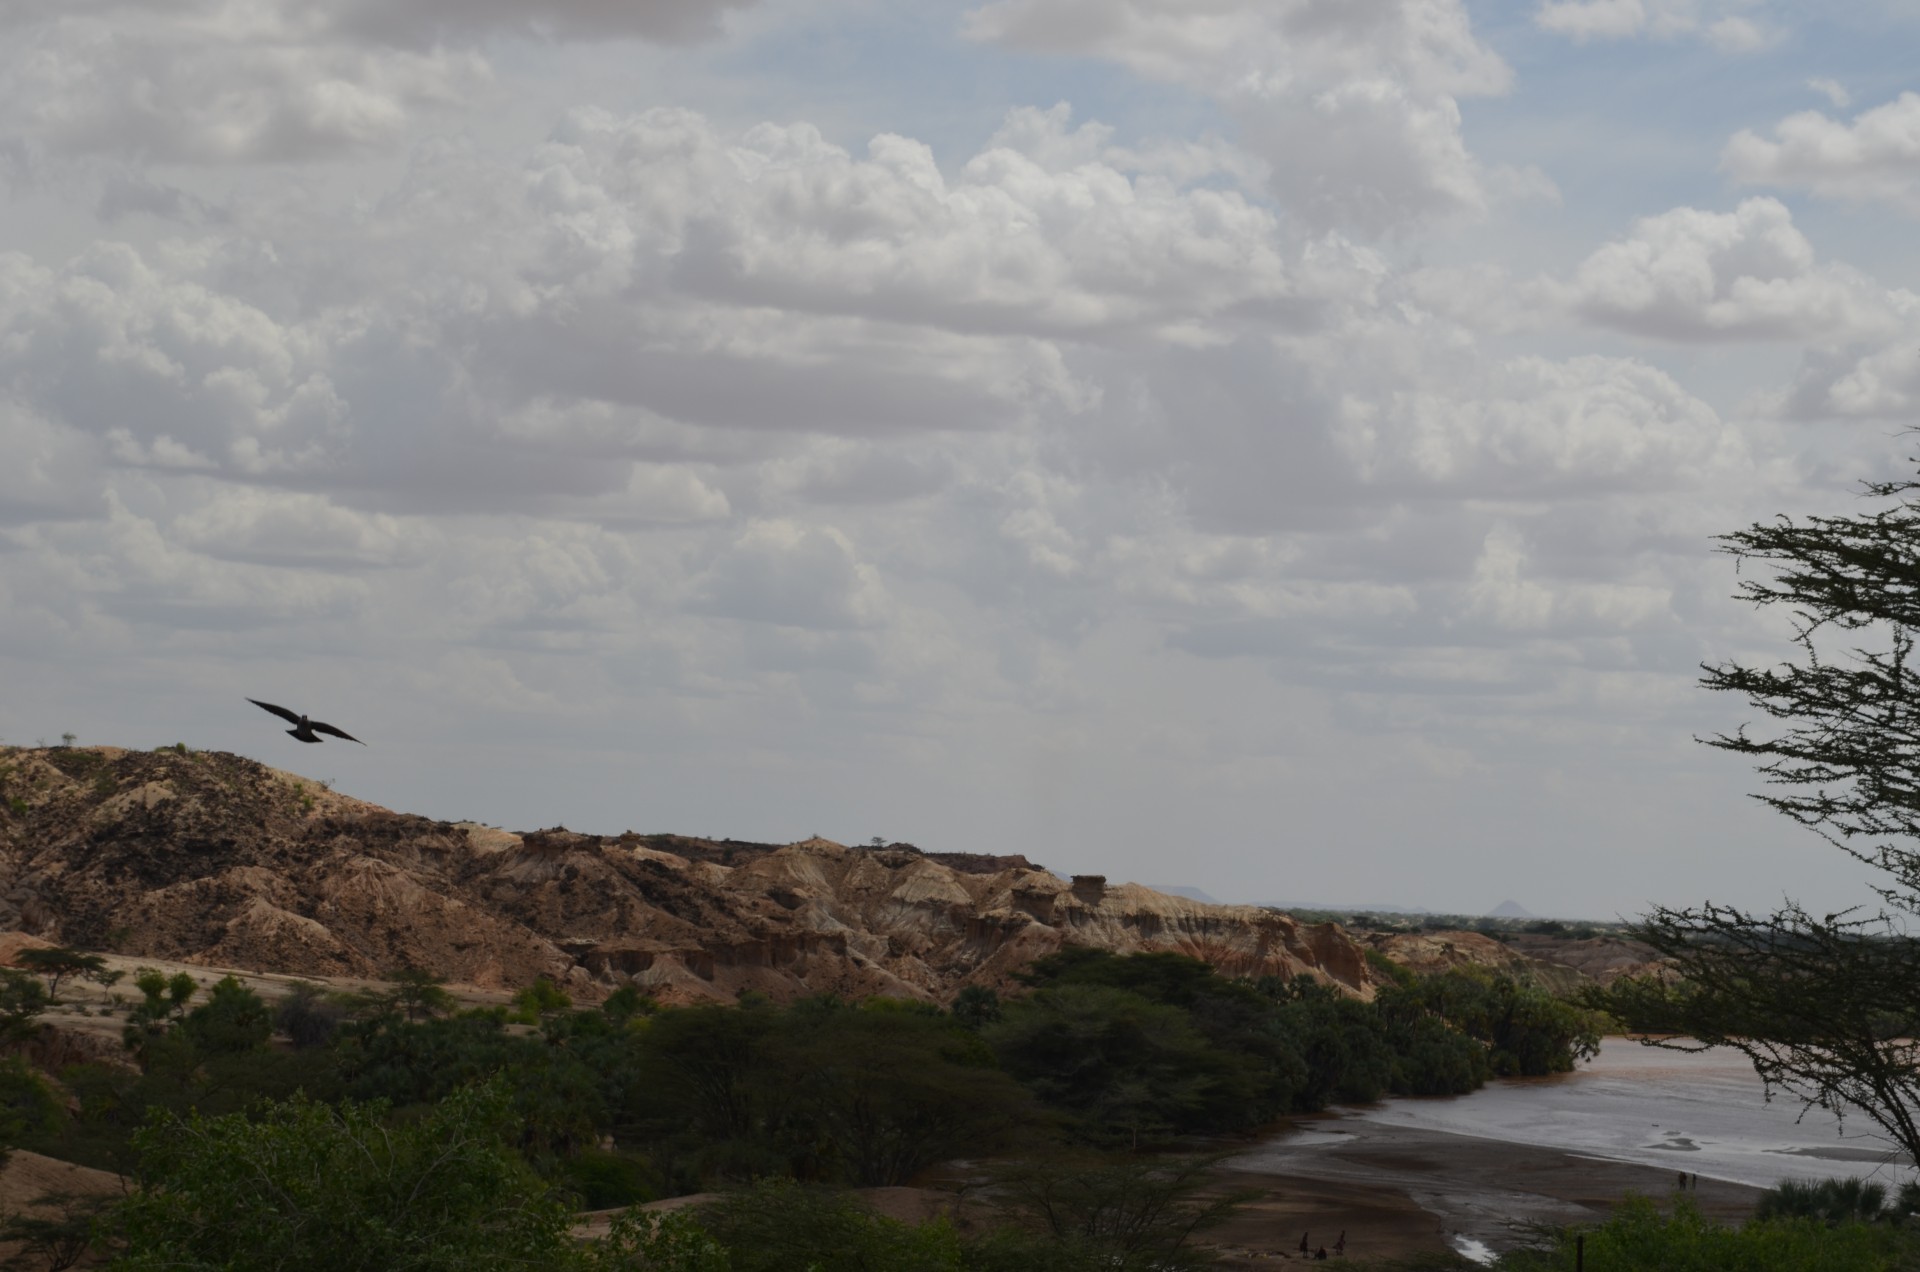 Deeply eroded badlands like these near the Turkwel River are ideal for finding fossils and artifacts.